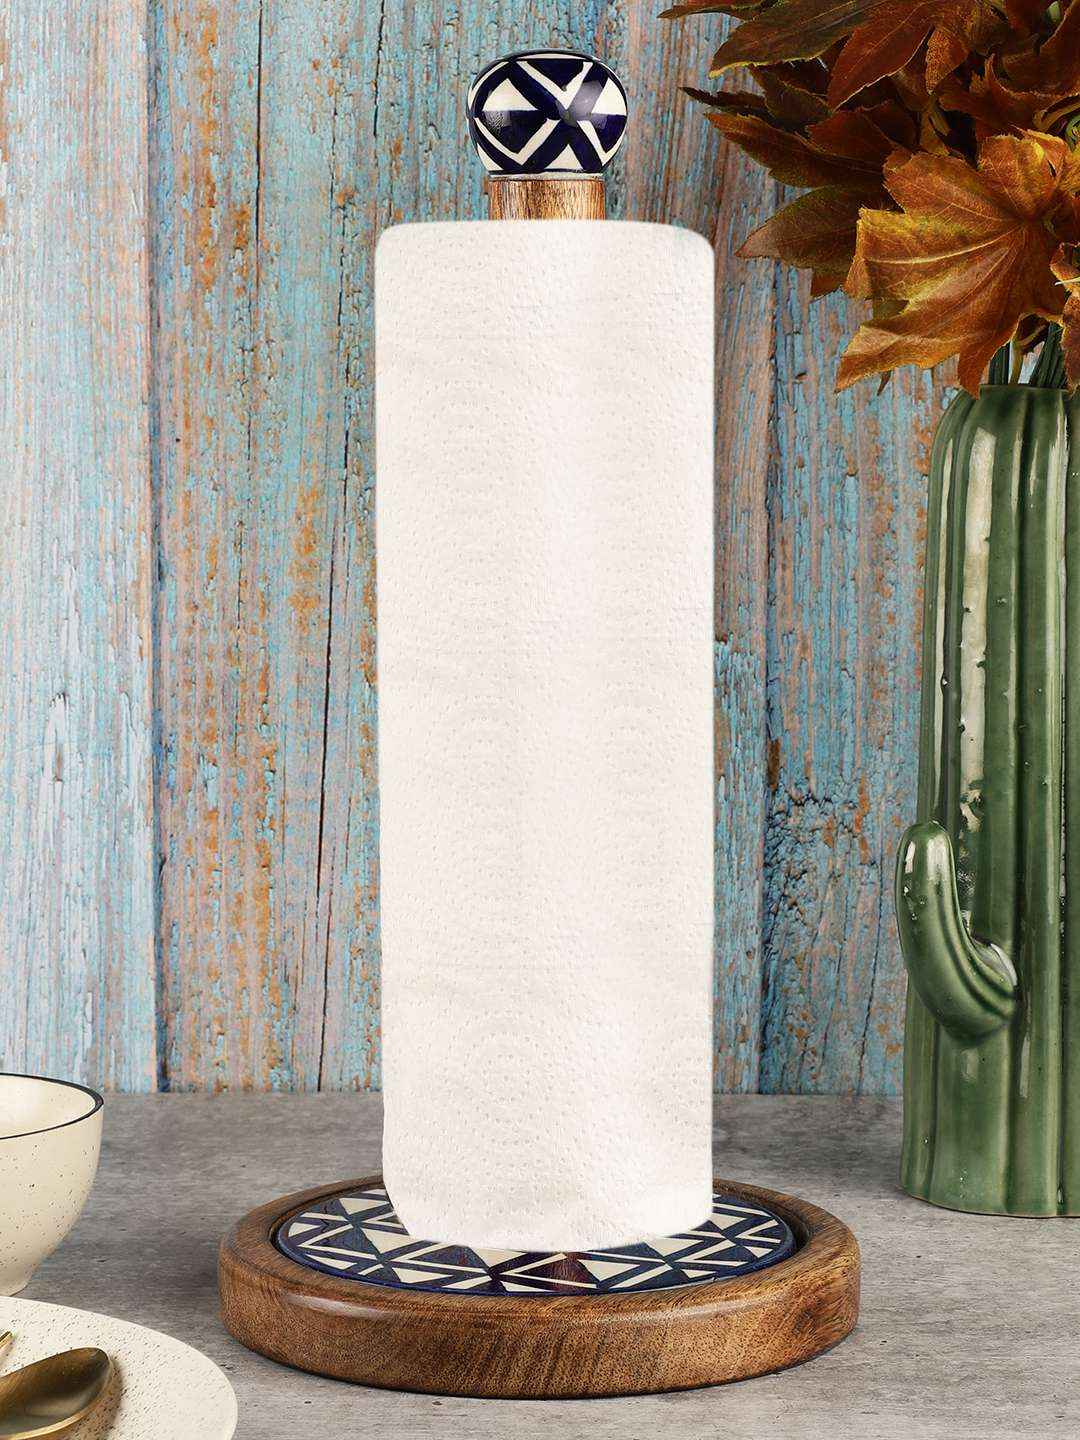 Ceramic & Wood Paper Towel Holder with Weighted Base for Standard Paper Towel Rolls